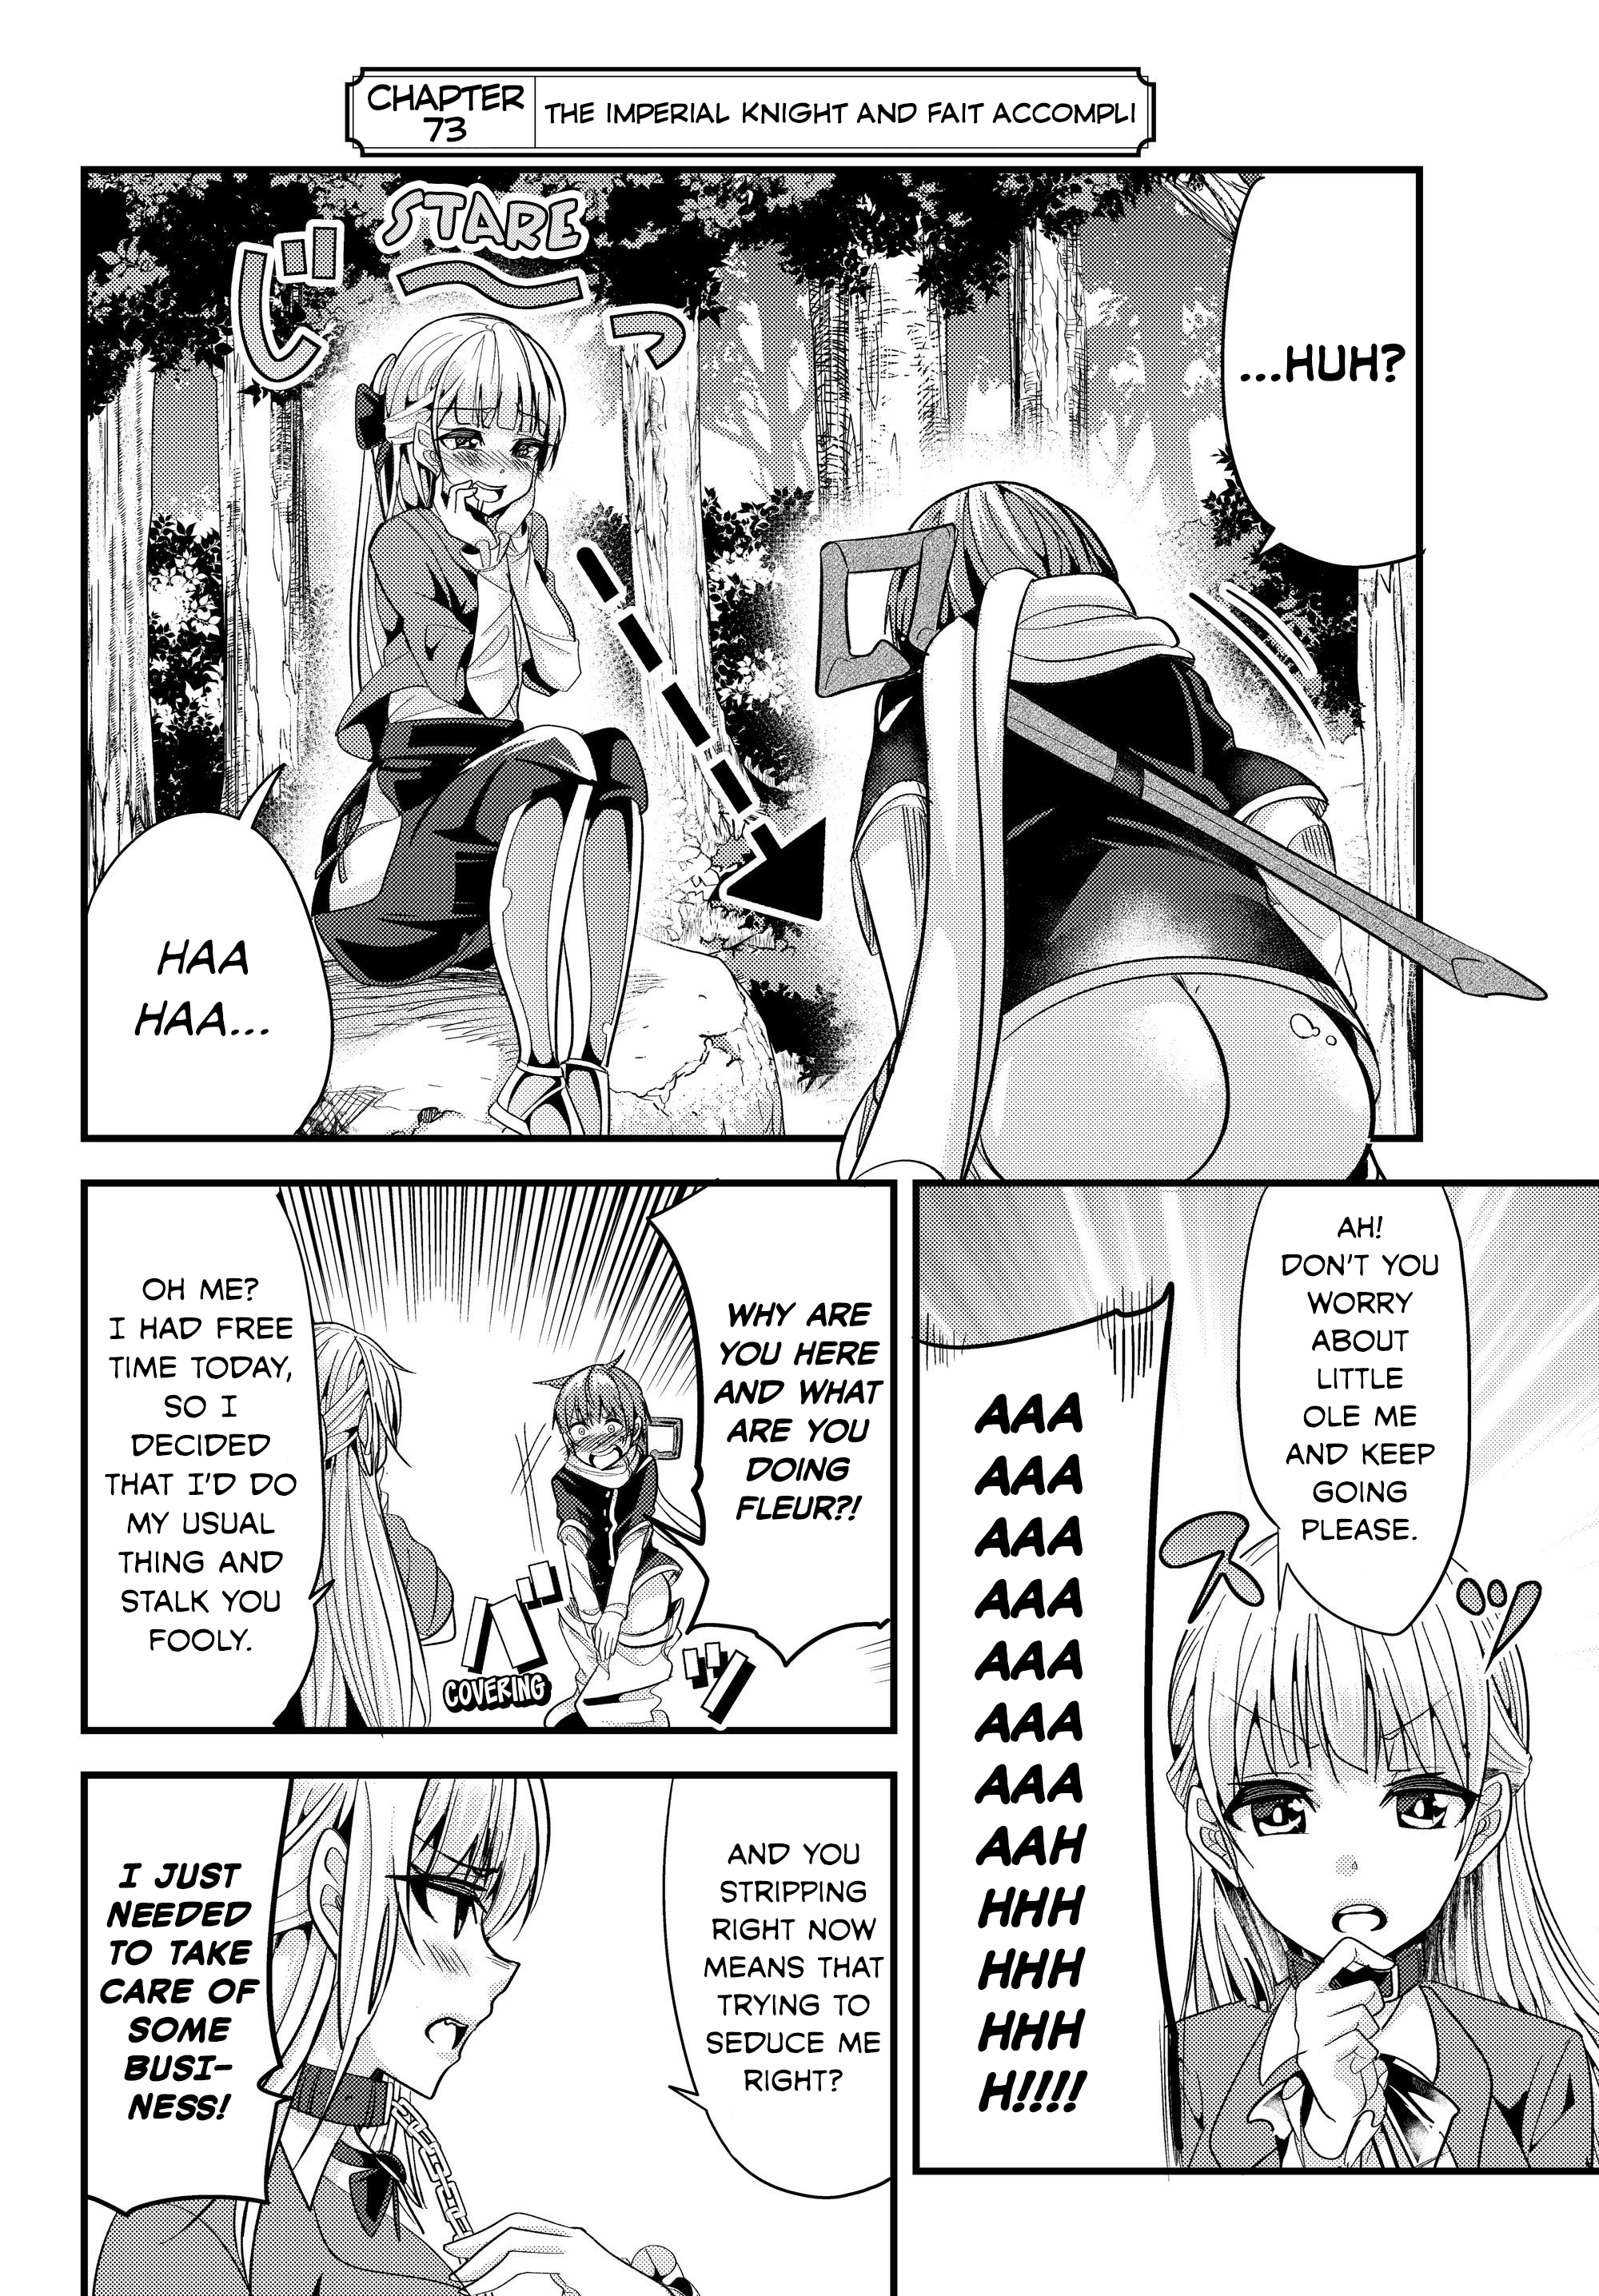 A Story About Treating A Female Knight Who Has Never Been Treated As A Woman As A Woman - Page 2